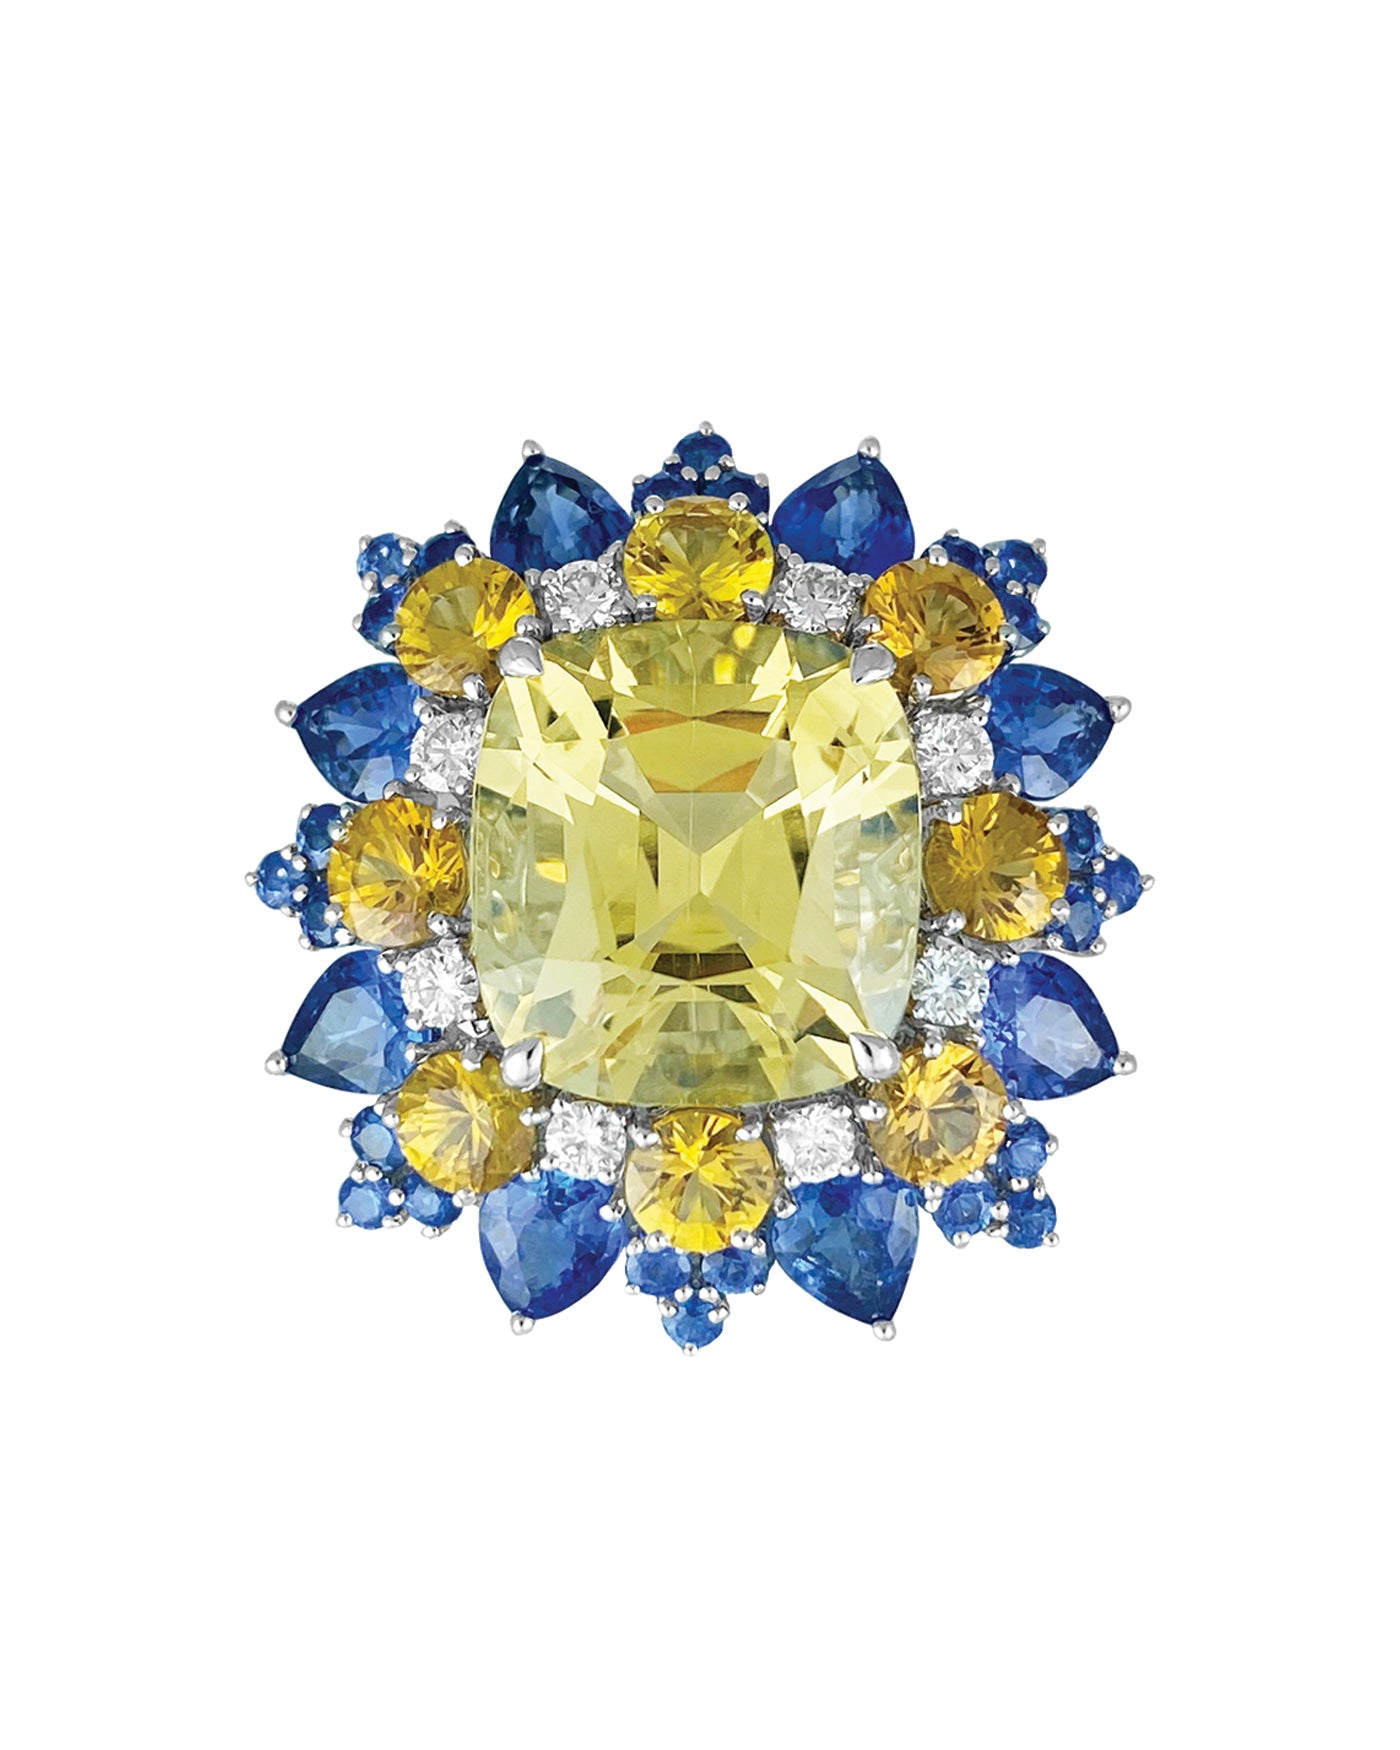 Yellow Beryl & Multi-Colour Stone Ring, crafted in 18 Karat White Gold